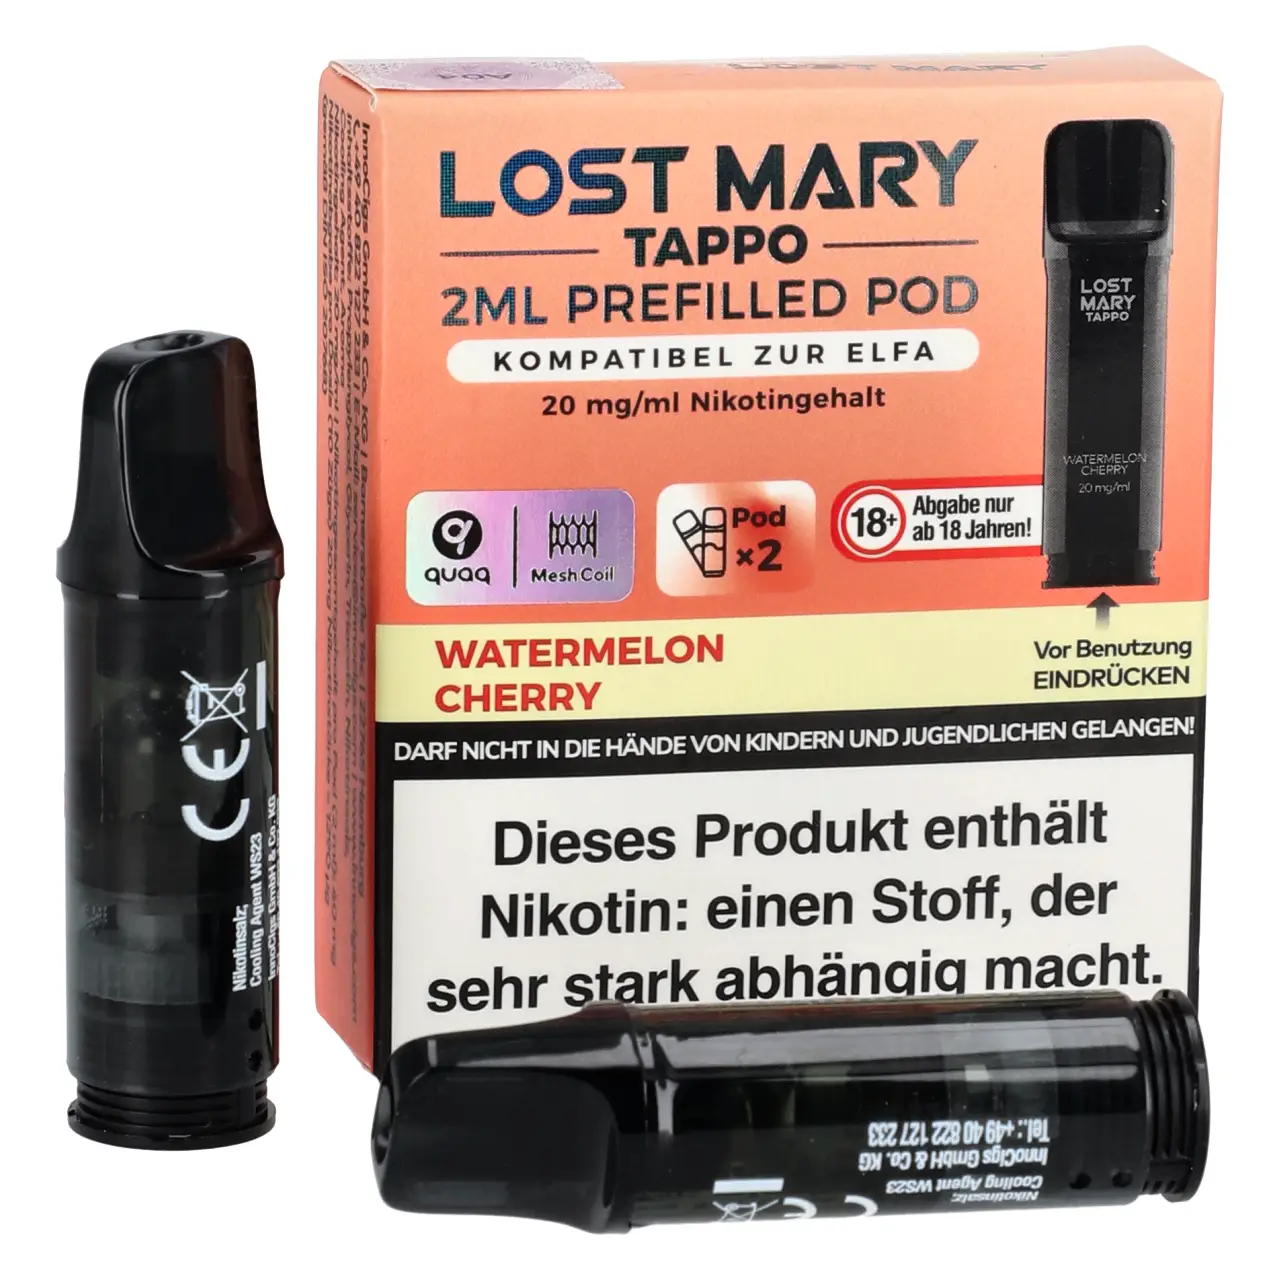 Lost Mary Tappo Prefilled Pod - Watermelon Cherry - 2er Packung